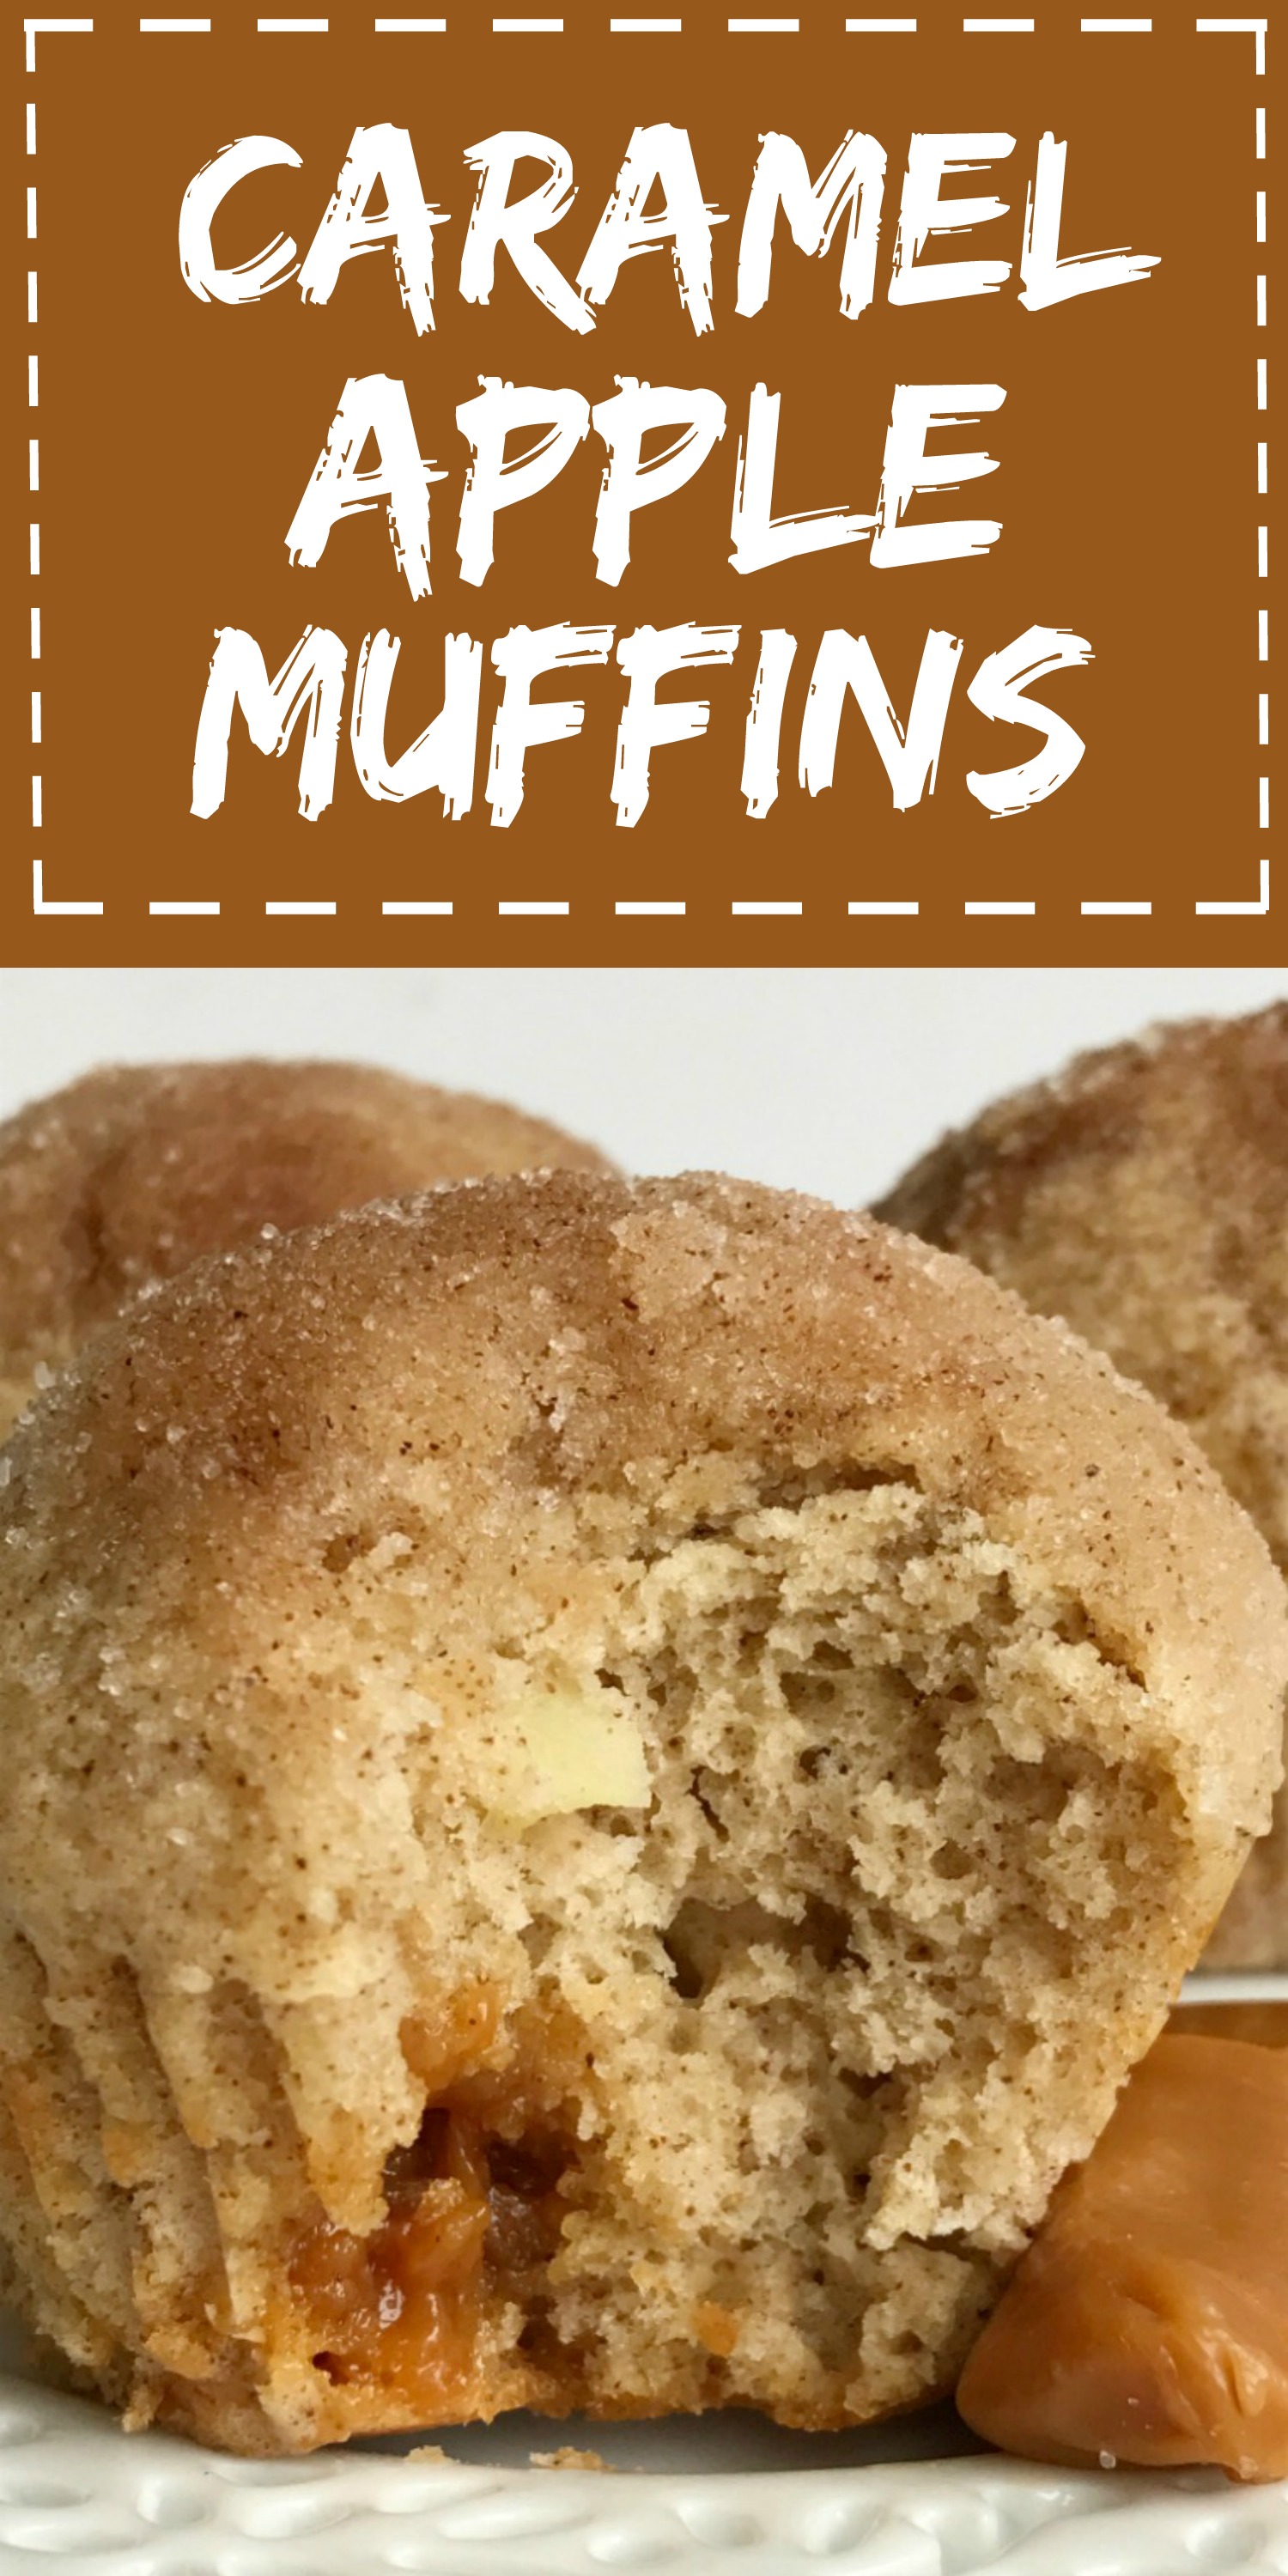 Caramel Apple Muffins | Caramel Apple | Muffin Recipe | Caramel apple muffins are bursting with warm cinnamon & sugar, chunks of apple, and caramel pieces. They bake up perfectly round like a bakery! These muffins are a fun twist to the classic caramel apple. #muffins #muffinrecipe #caramelapple #snack #easyrecipe #recipeoftheday